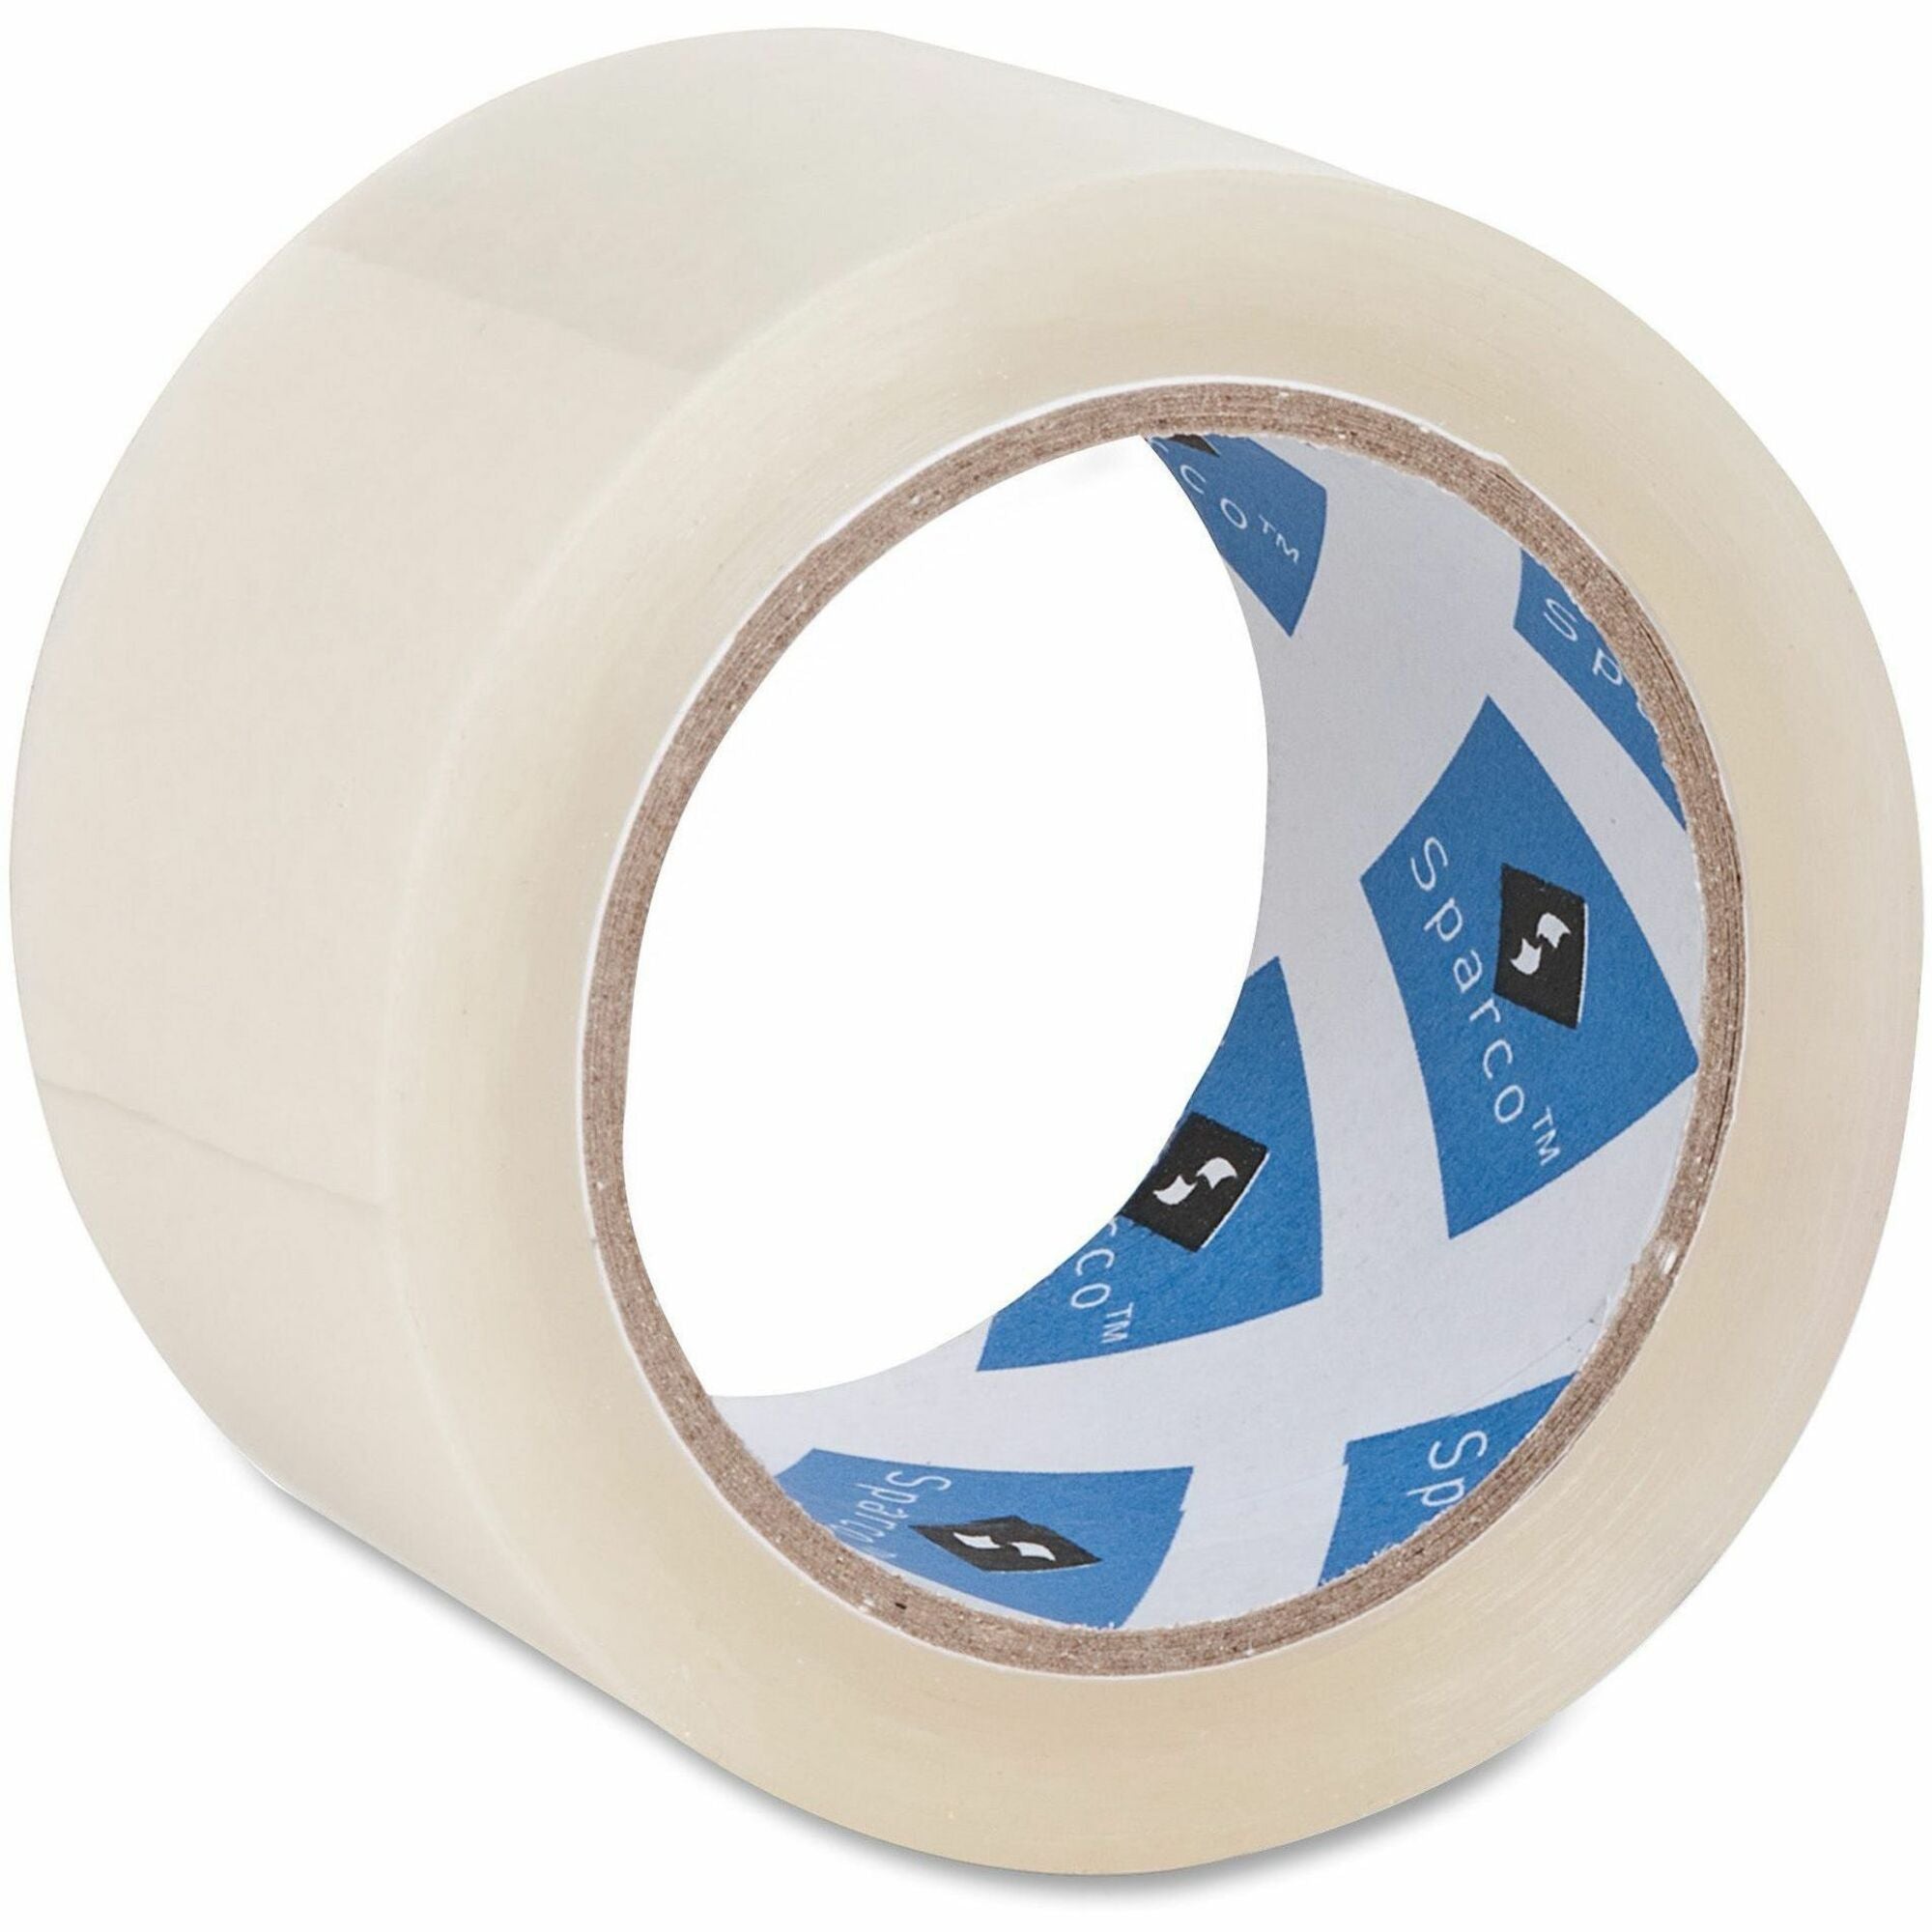 Sparco Premium Heavy-duty Packaging Tape Roll - 55 yd Length x 1.88" Width - 3" Core - 3 mil - Acrylic Backing - Tear Resistant, Split Resistant, Breakage Resistance - For Packing - 1 / Roll - Clear - 